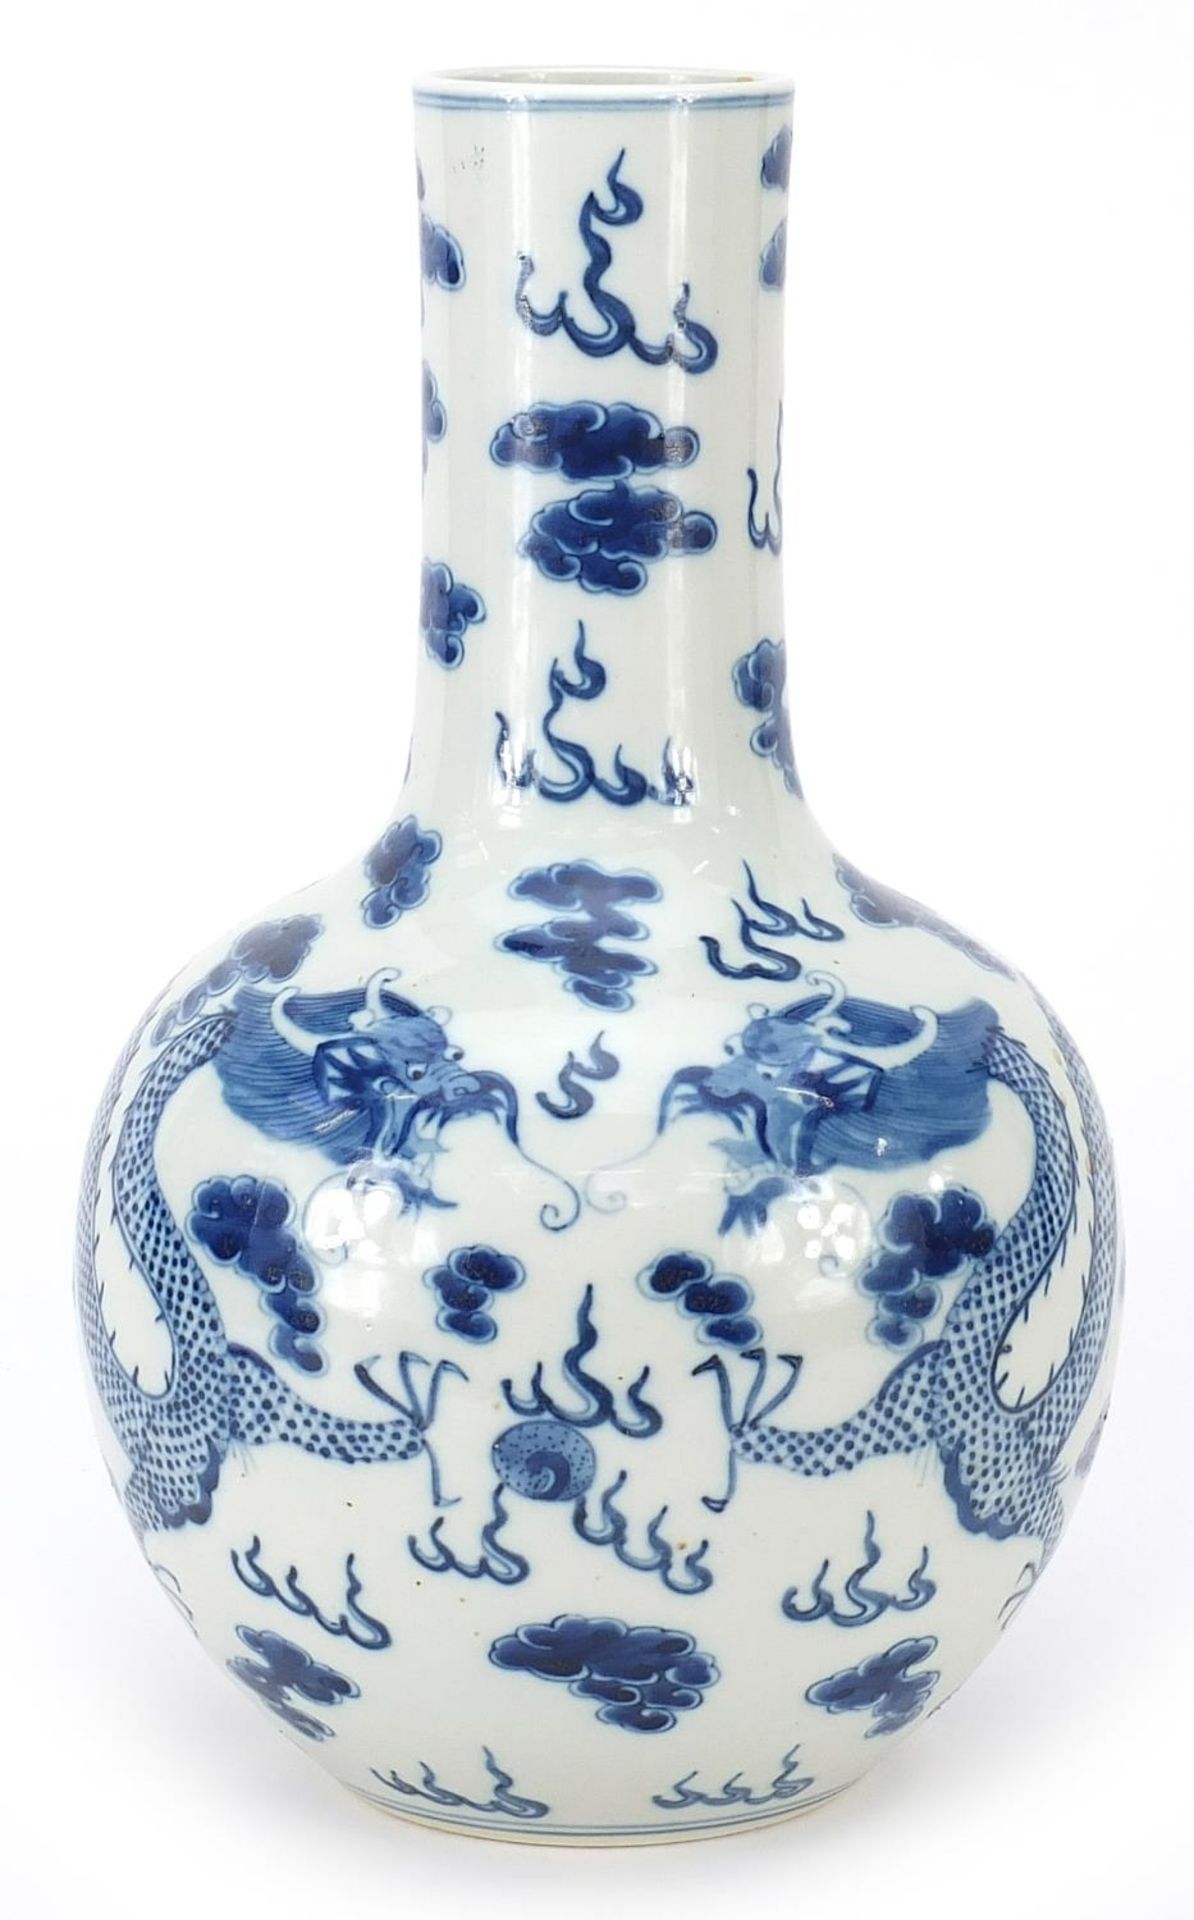 Chinese blue and white porcelain vase hand painted with dragons chasing a flaming pearl amongst